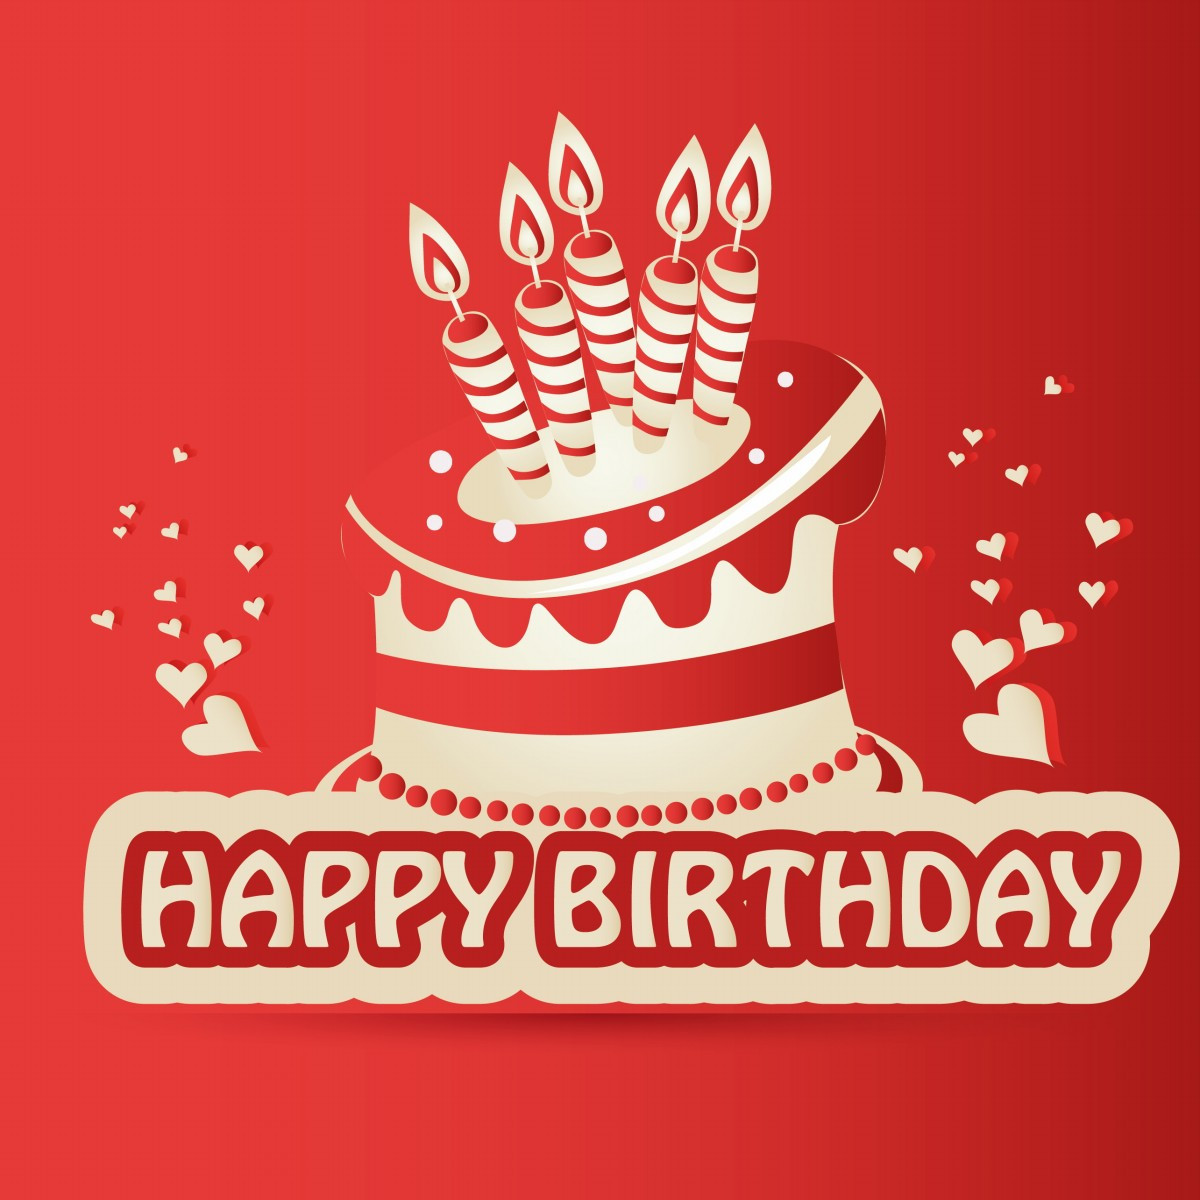 Birthday Cards Pictures
 35 Happy Birthday Cards Free To Download – The WoW Style